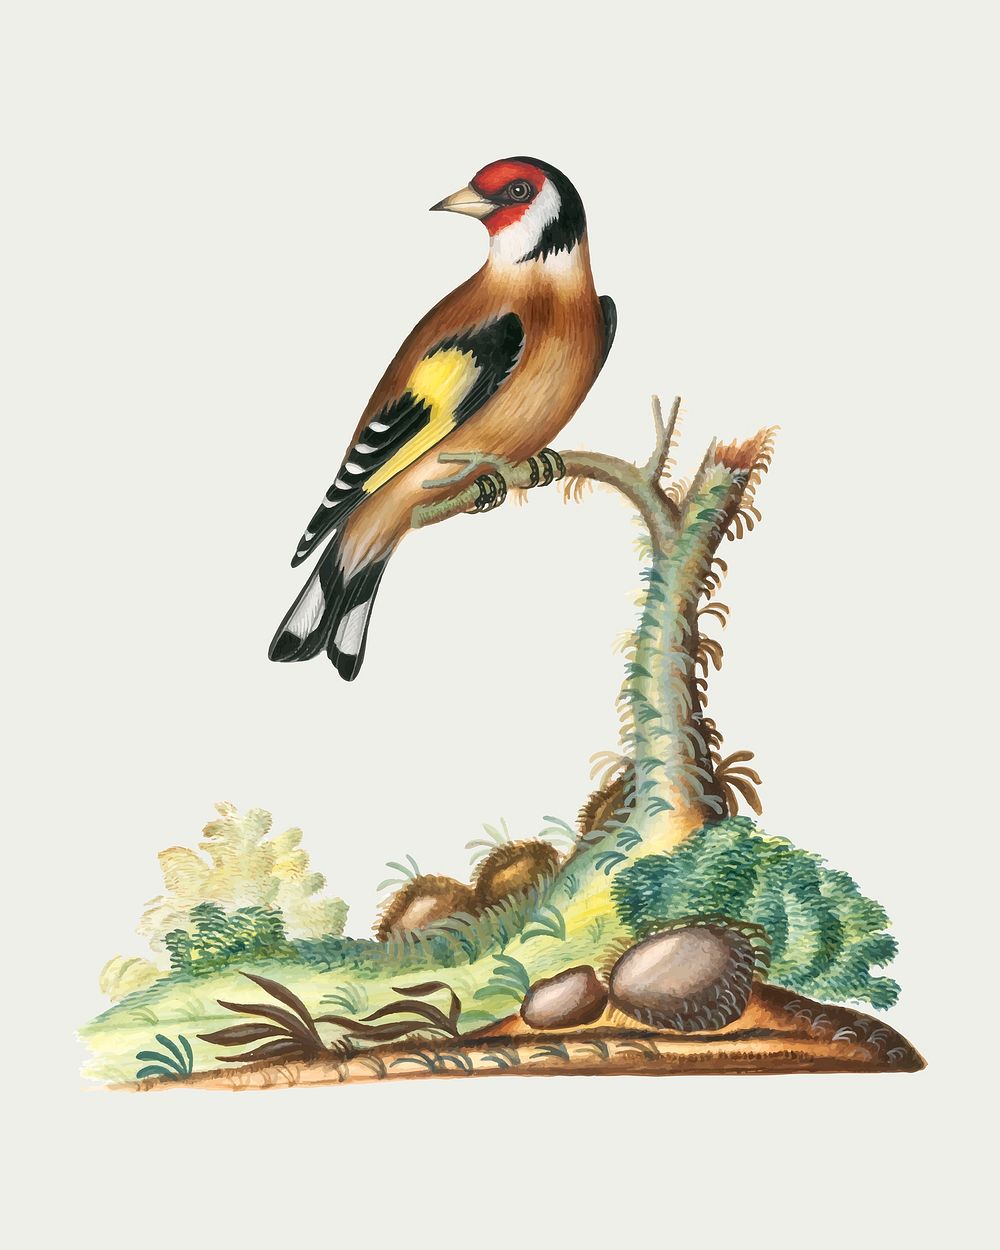 Vintage goldfinch sticker, bird watercolor painting vector, remixed from artworks by James Bolton